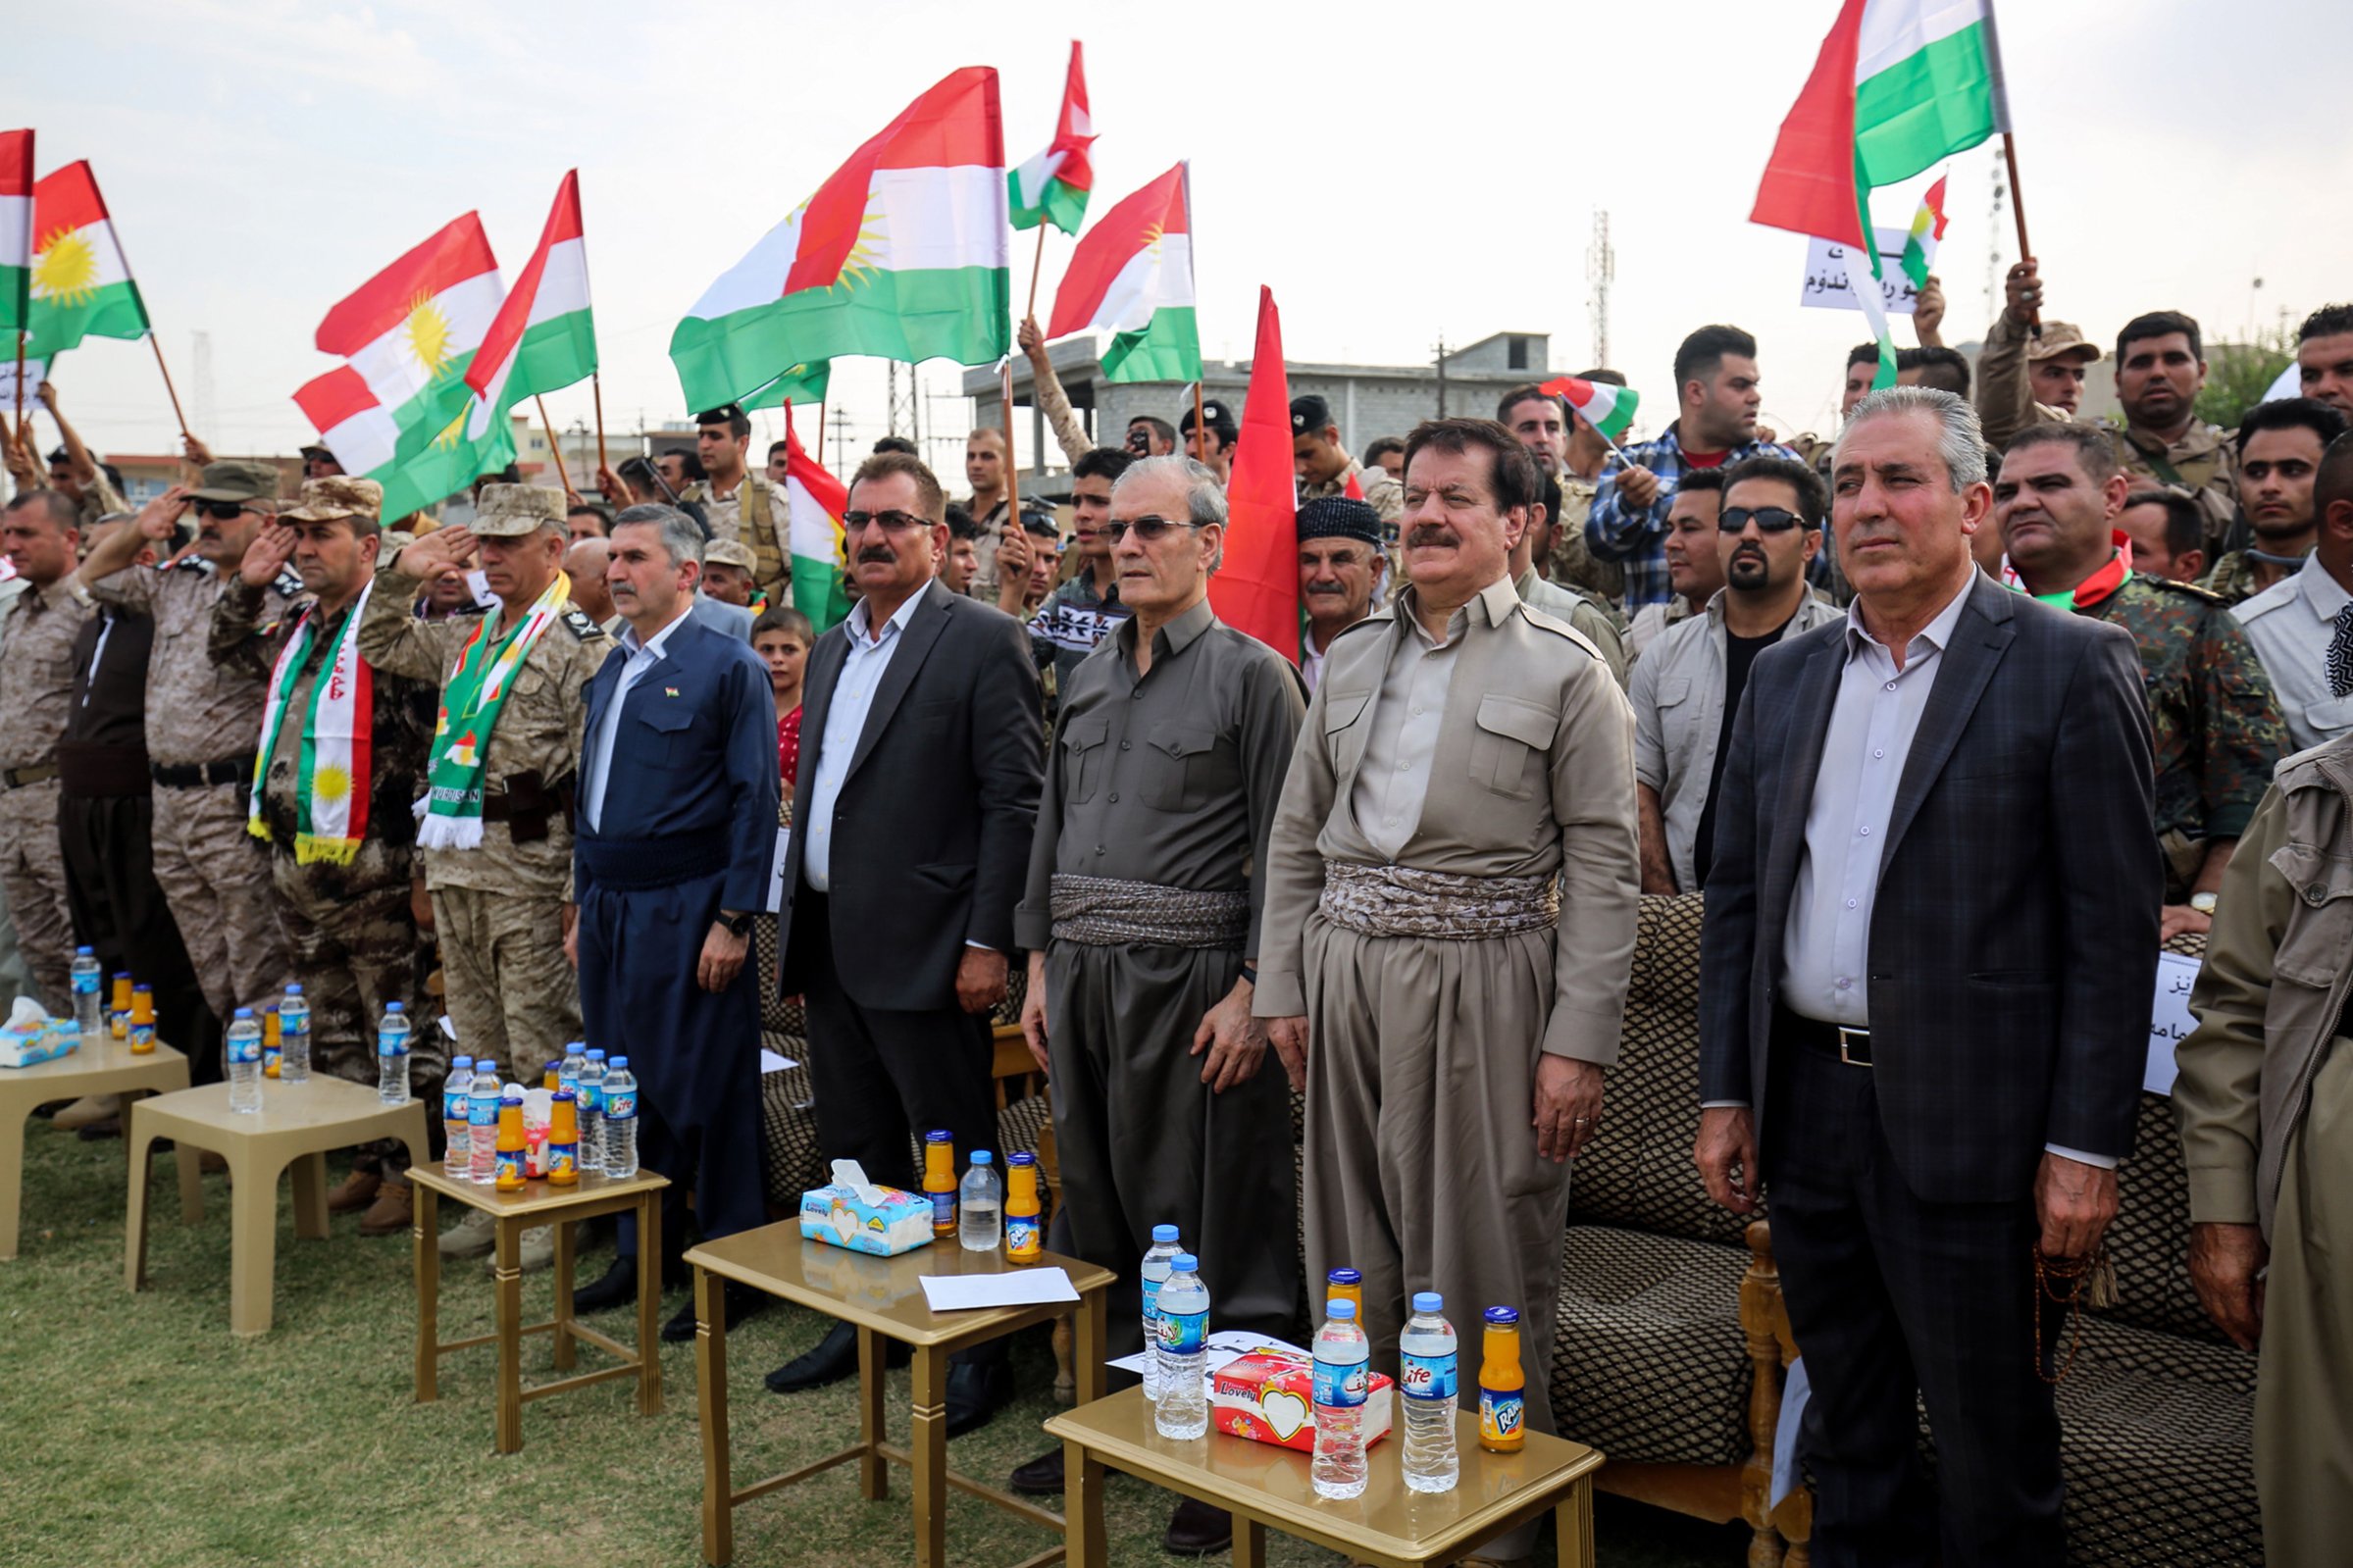 Kirkuk's provincial governor Najim al-Din Karim third from right, who was recently sacked by the Iraqi parliament, attends a rally in support of the upcoming independence referendum in Kirkuk on Sept. 19, 2017